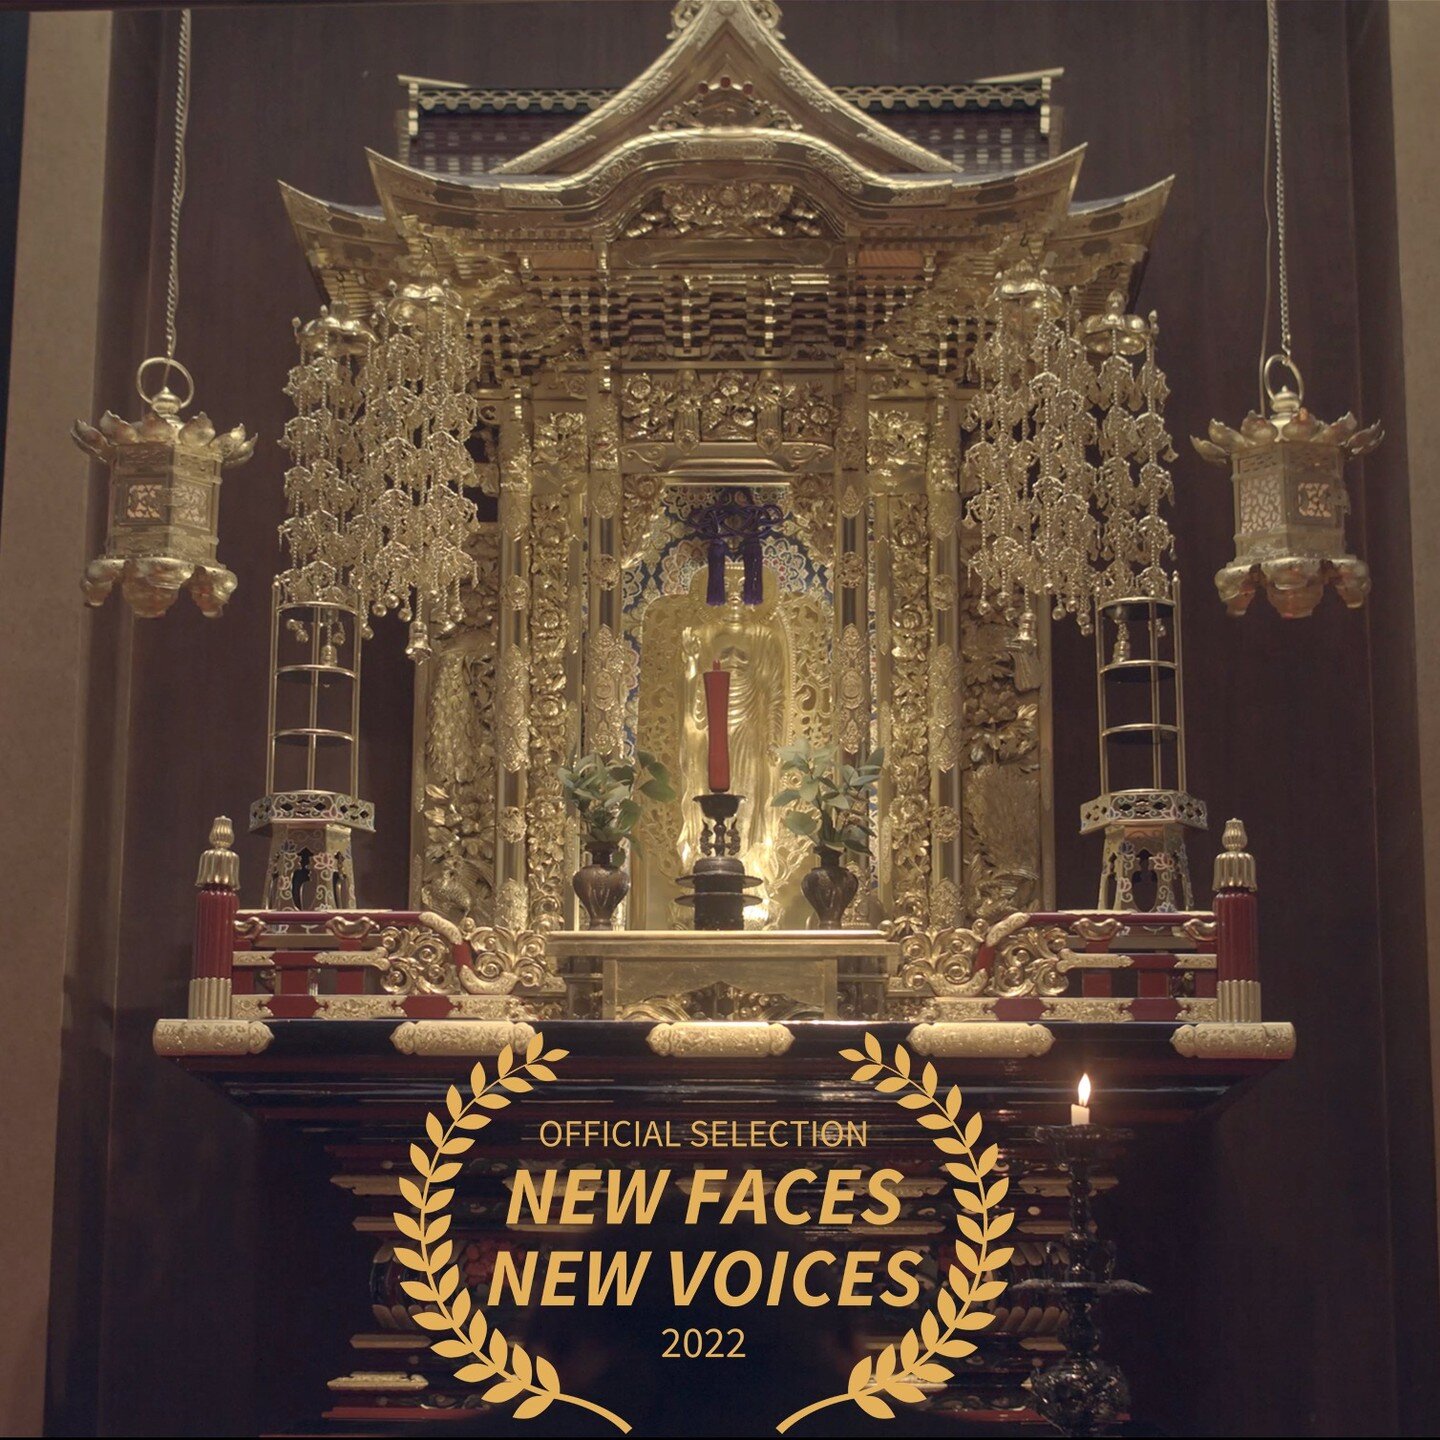 She's making her New York debut!! Bath Bomb will be playing at New Faces New Voices film fest on September 13th at Alamo Drafthouse BK! Tickets in bio- would love to see you there &lt;33 #NFNV2022 #newfacesnewvoices #NFNV4